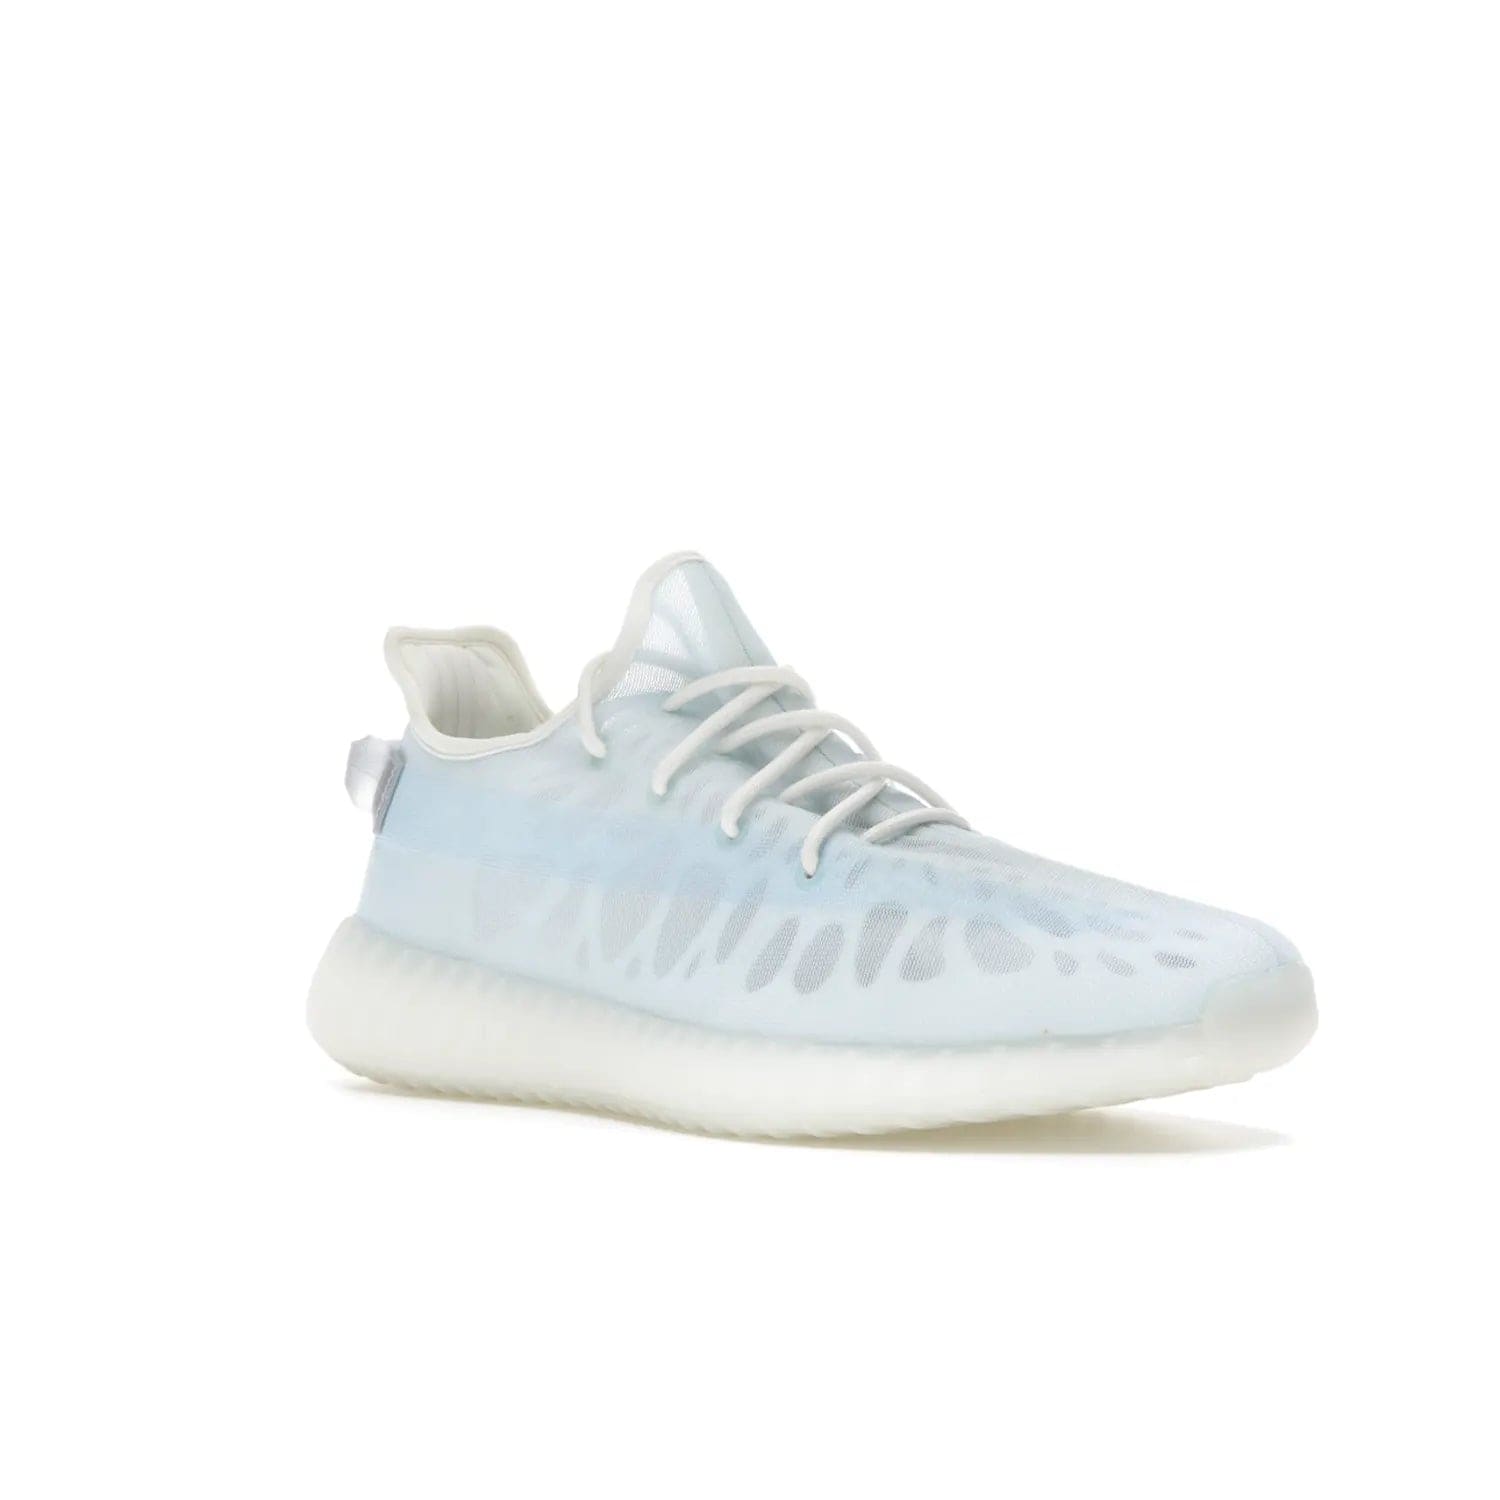 adidas Yeezy Boost 350 V2 Mono Ice - Image 5 - Only at www.BallersClubKickz.com - Introducing the adidas Yeezy 350 V2 Mono Ice - a sleek monofilament mesh design in Ice blue with Boost sole and heel pull tab. Released exclusively in the US for $220.